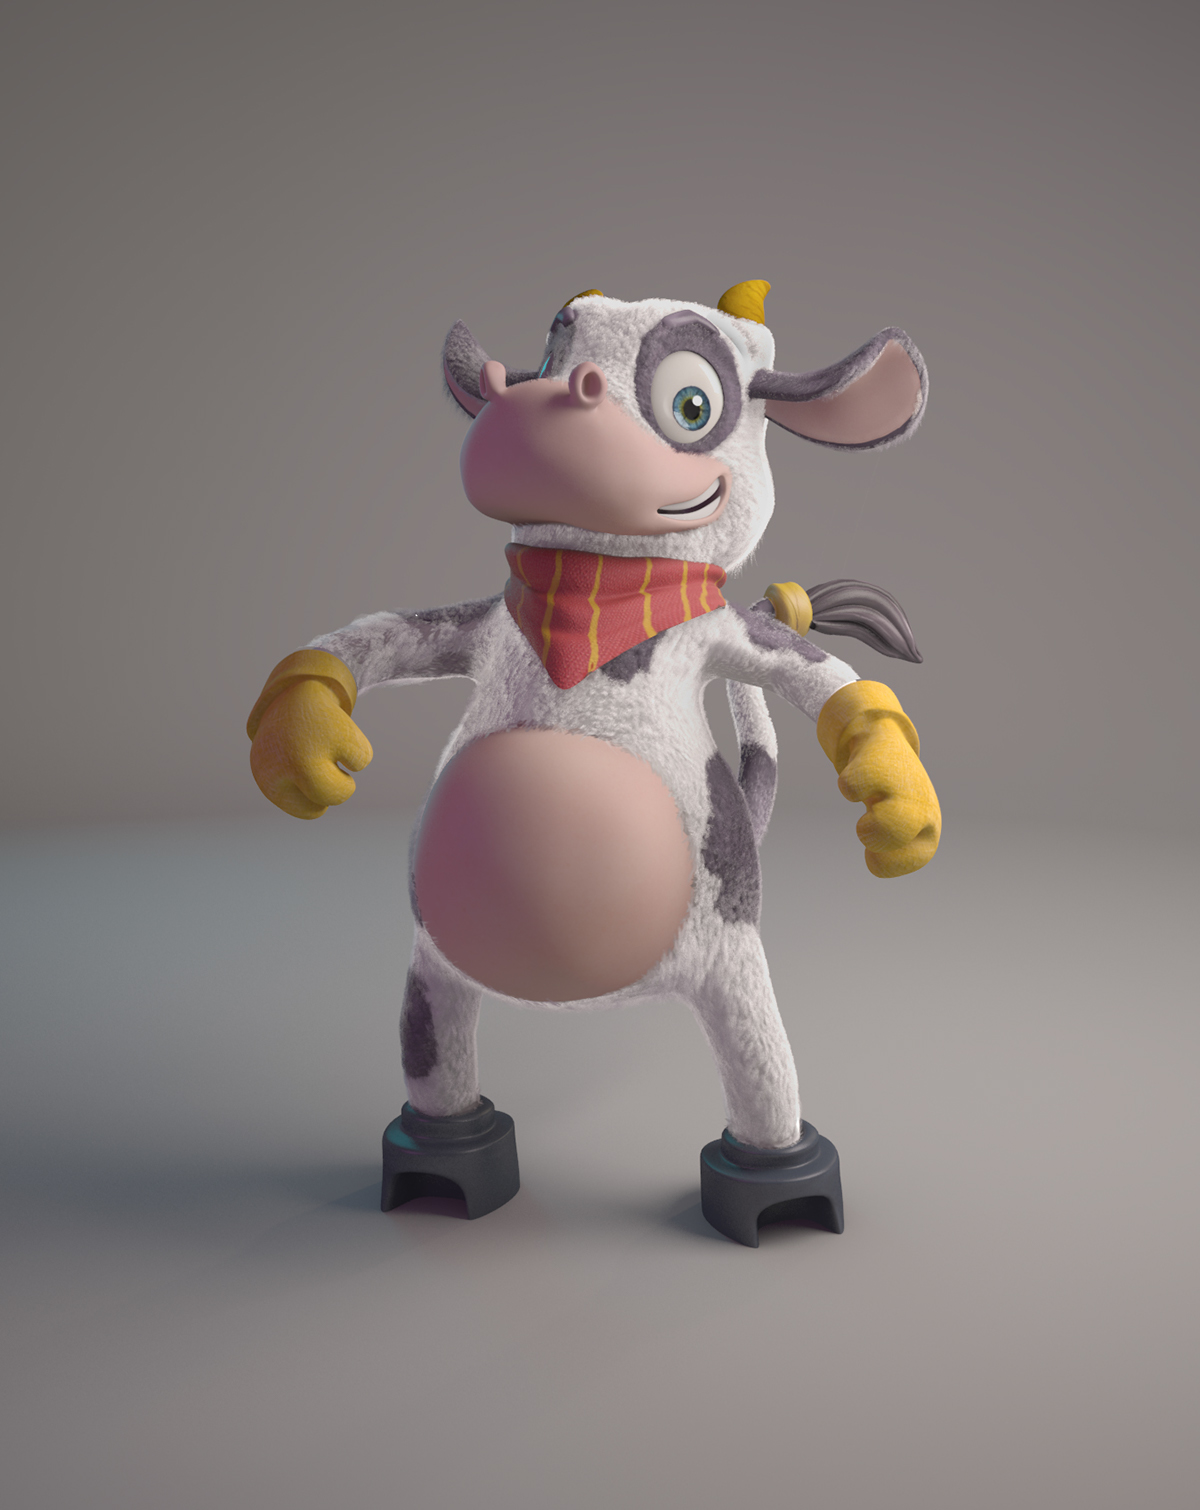 cow Fur 3ds max softimage Zbrush Posing 3D Character Hair and Fur Render photoshop 3D animal animation ready